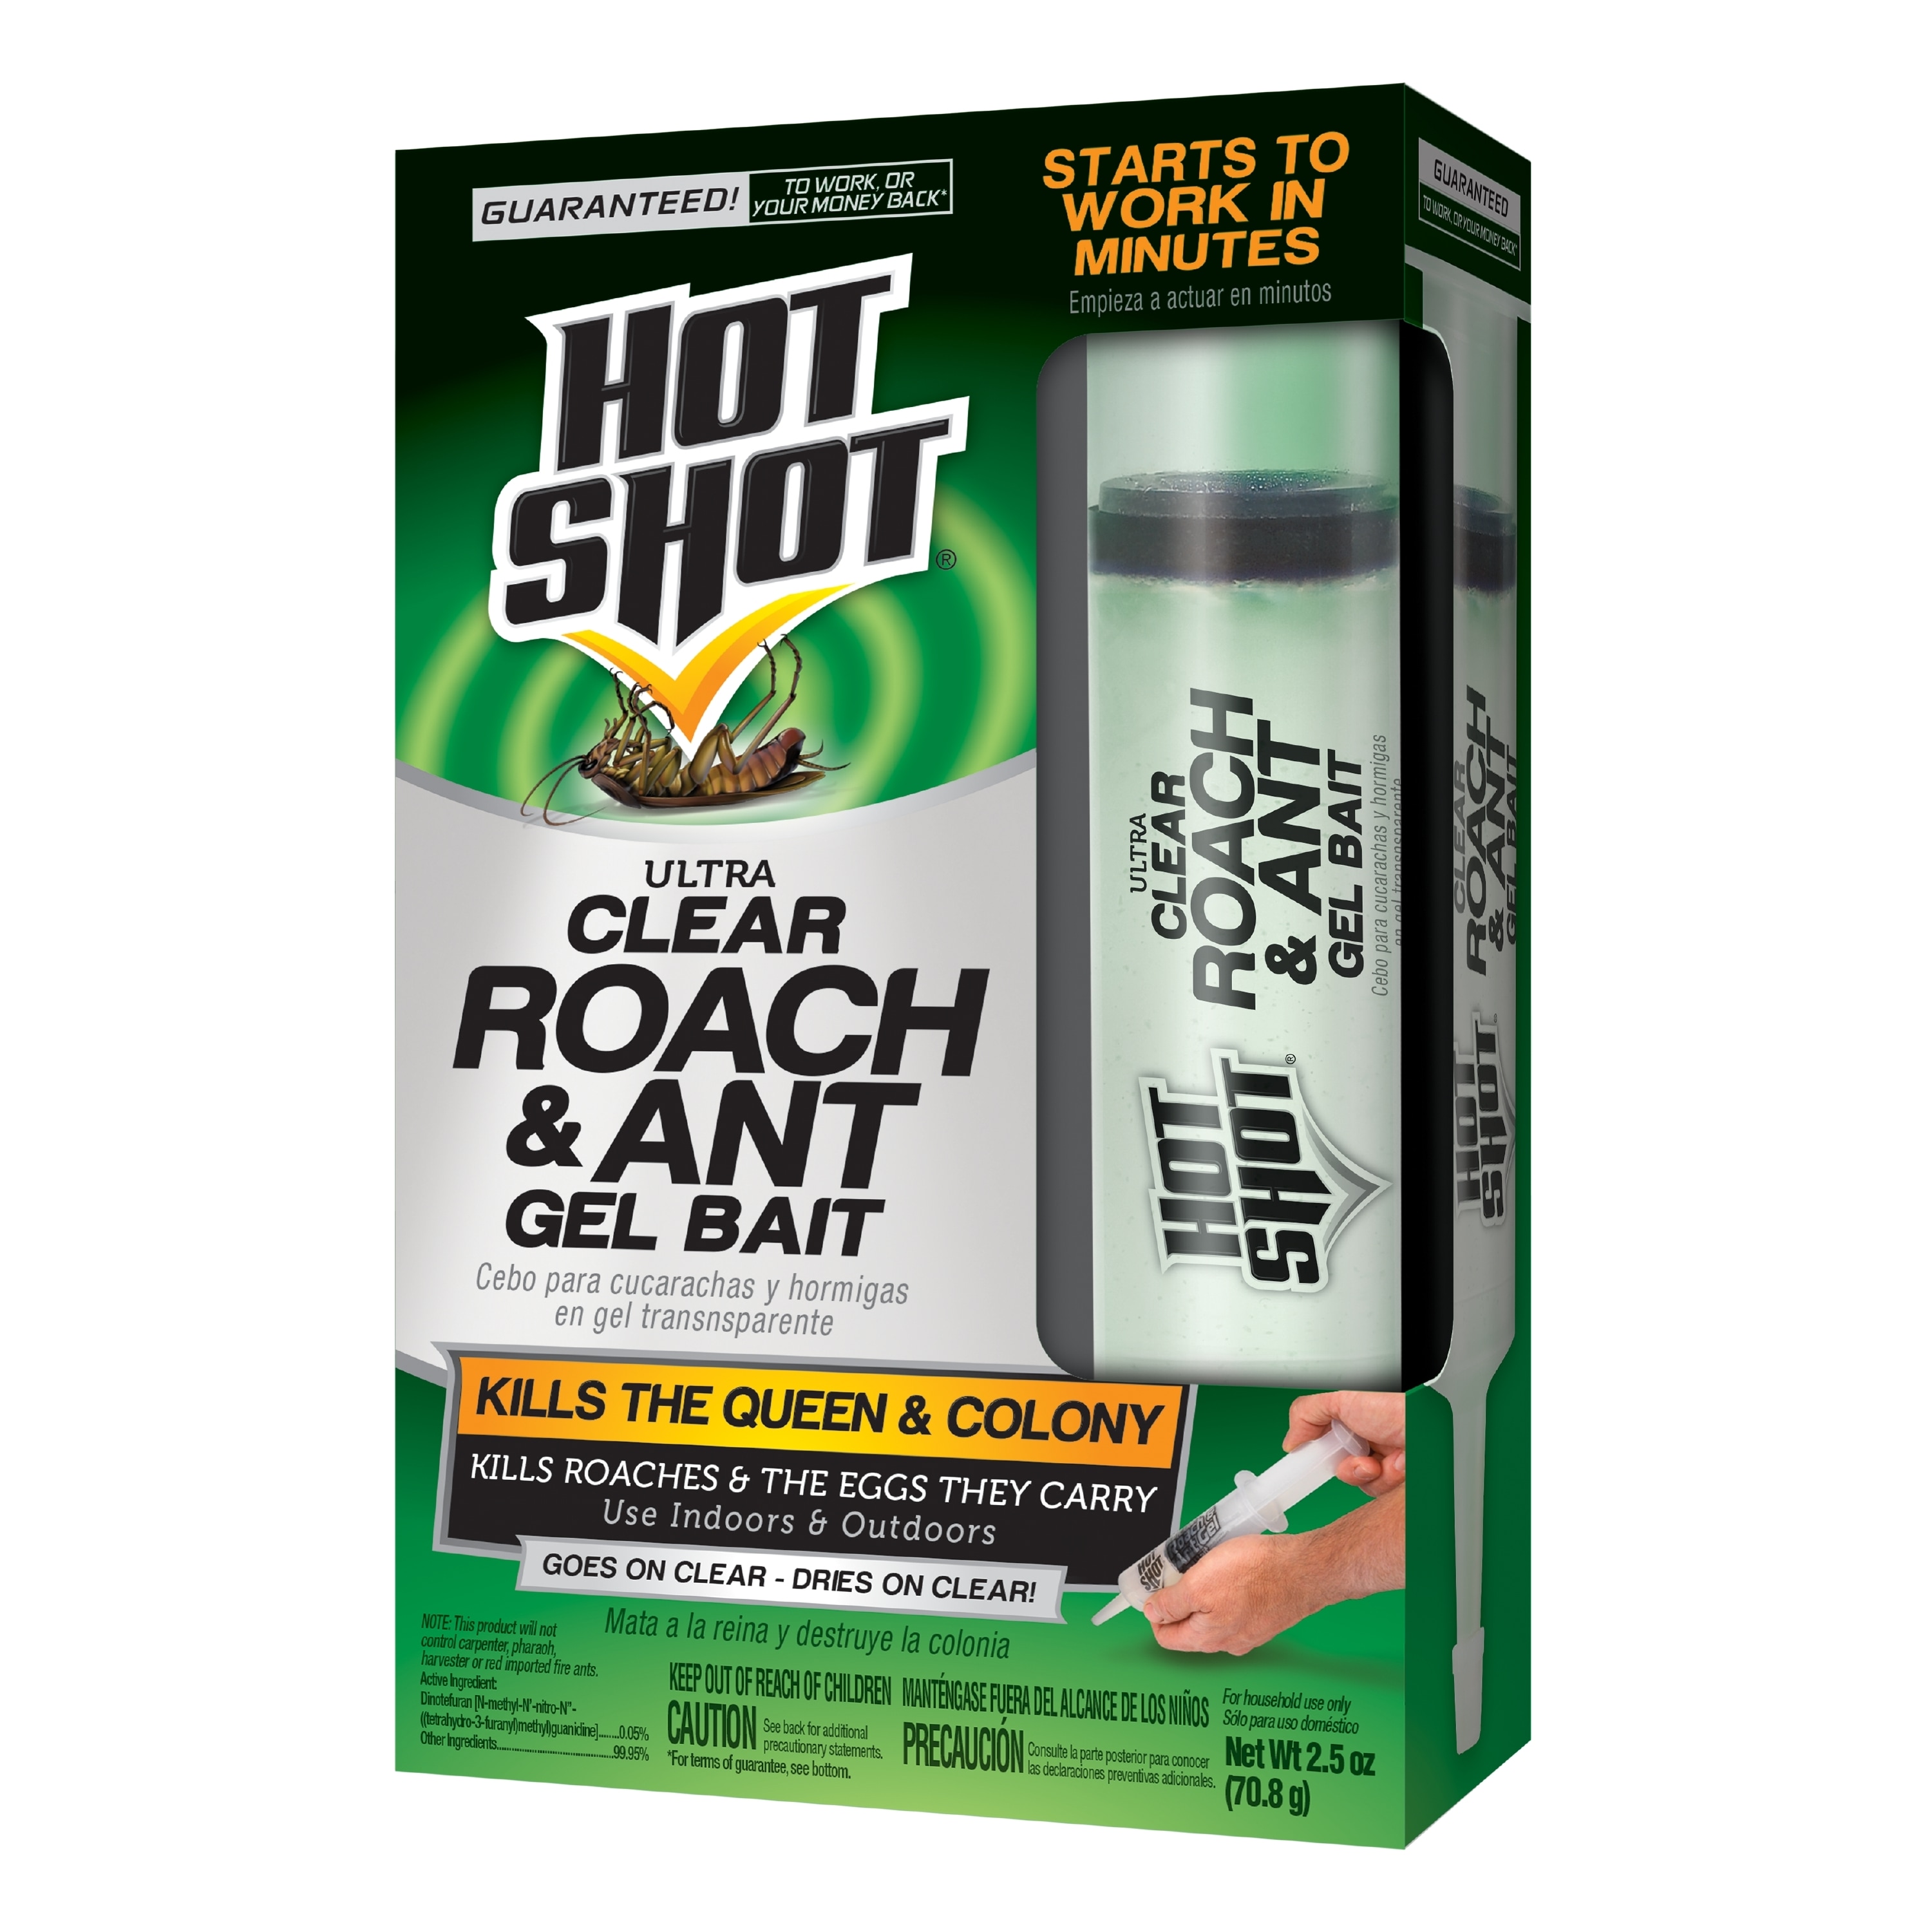 Powerful Safe Insecticide Pest Cockroach Control Roach Killer Gel Bait Free Ship 